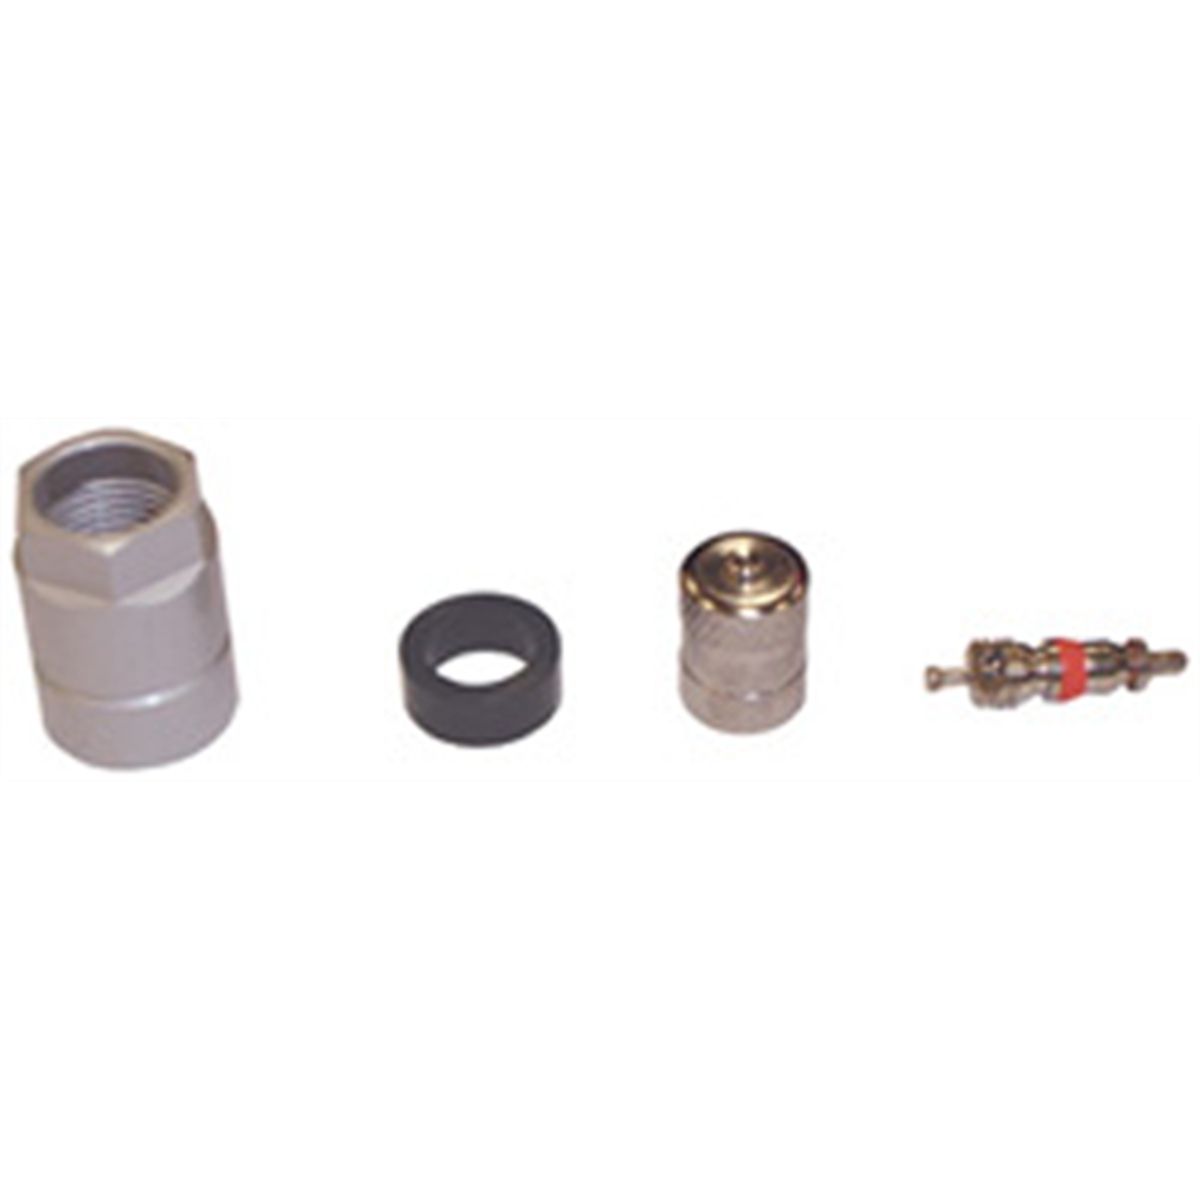 TPMS Replacement Parts Kit For Infiniti, Nissan